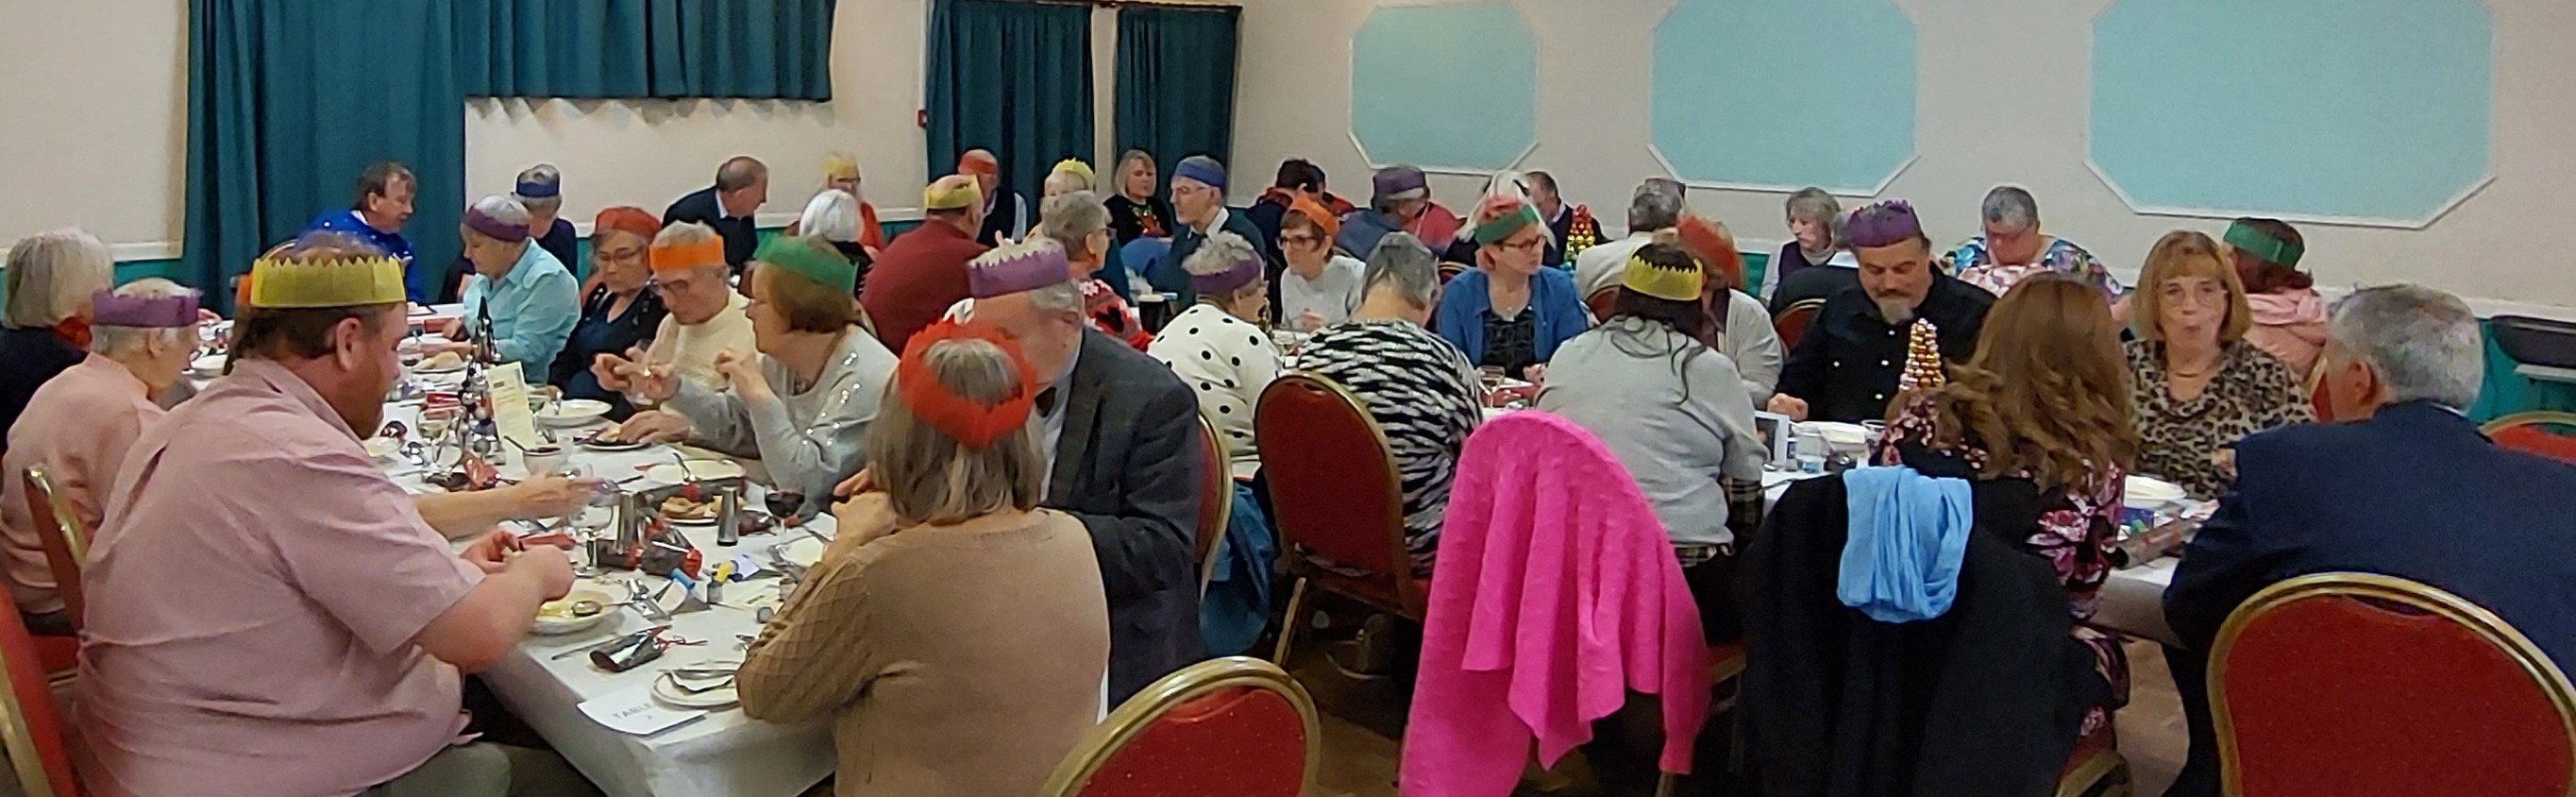 Axminster Care Service volunteers got together for their annual Christmas party